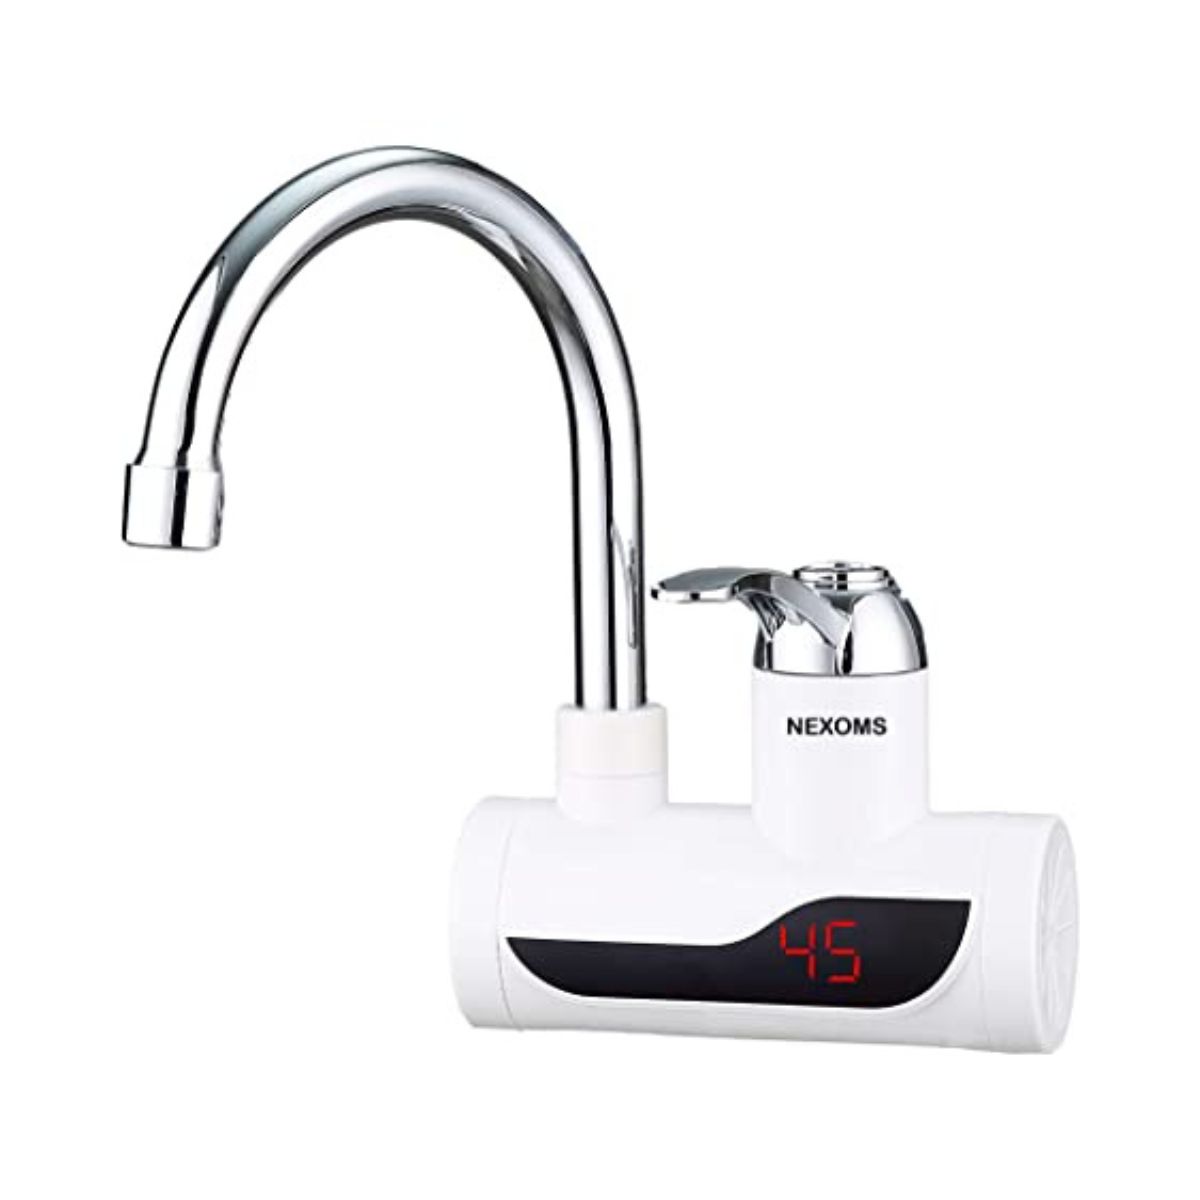 Nexoms 3-5 Seconds Instant Heating Faucet - Wall Mount Digital Series (CW01)